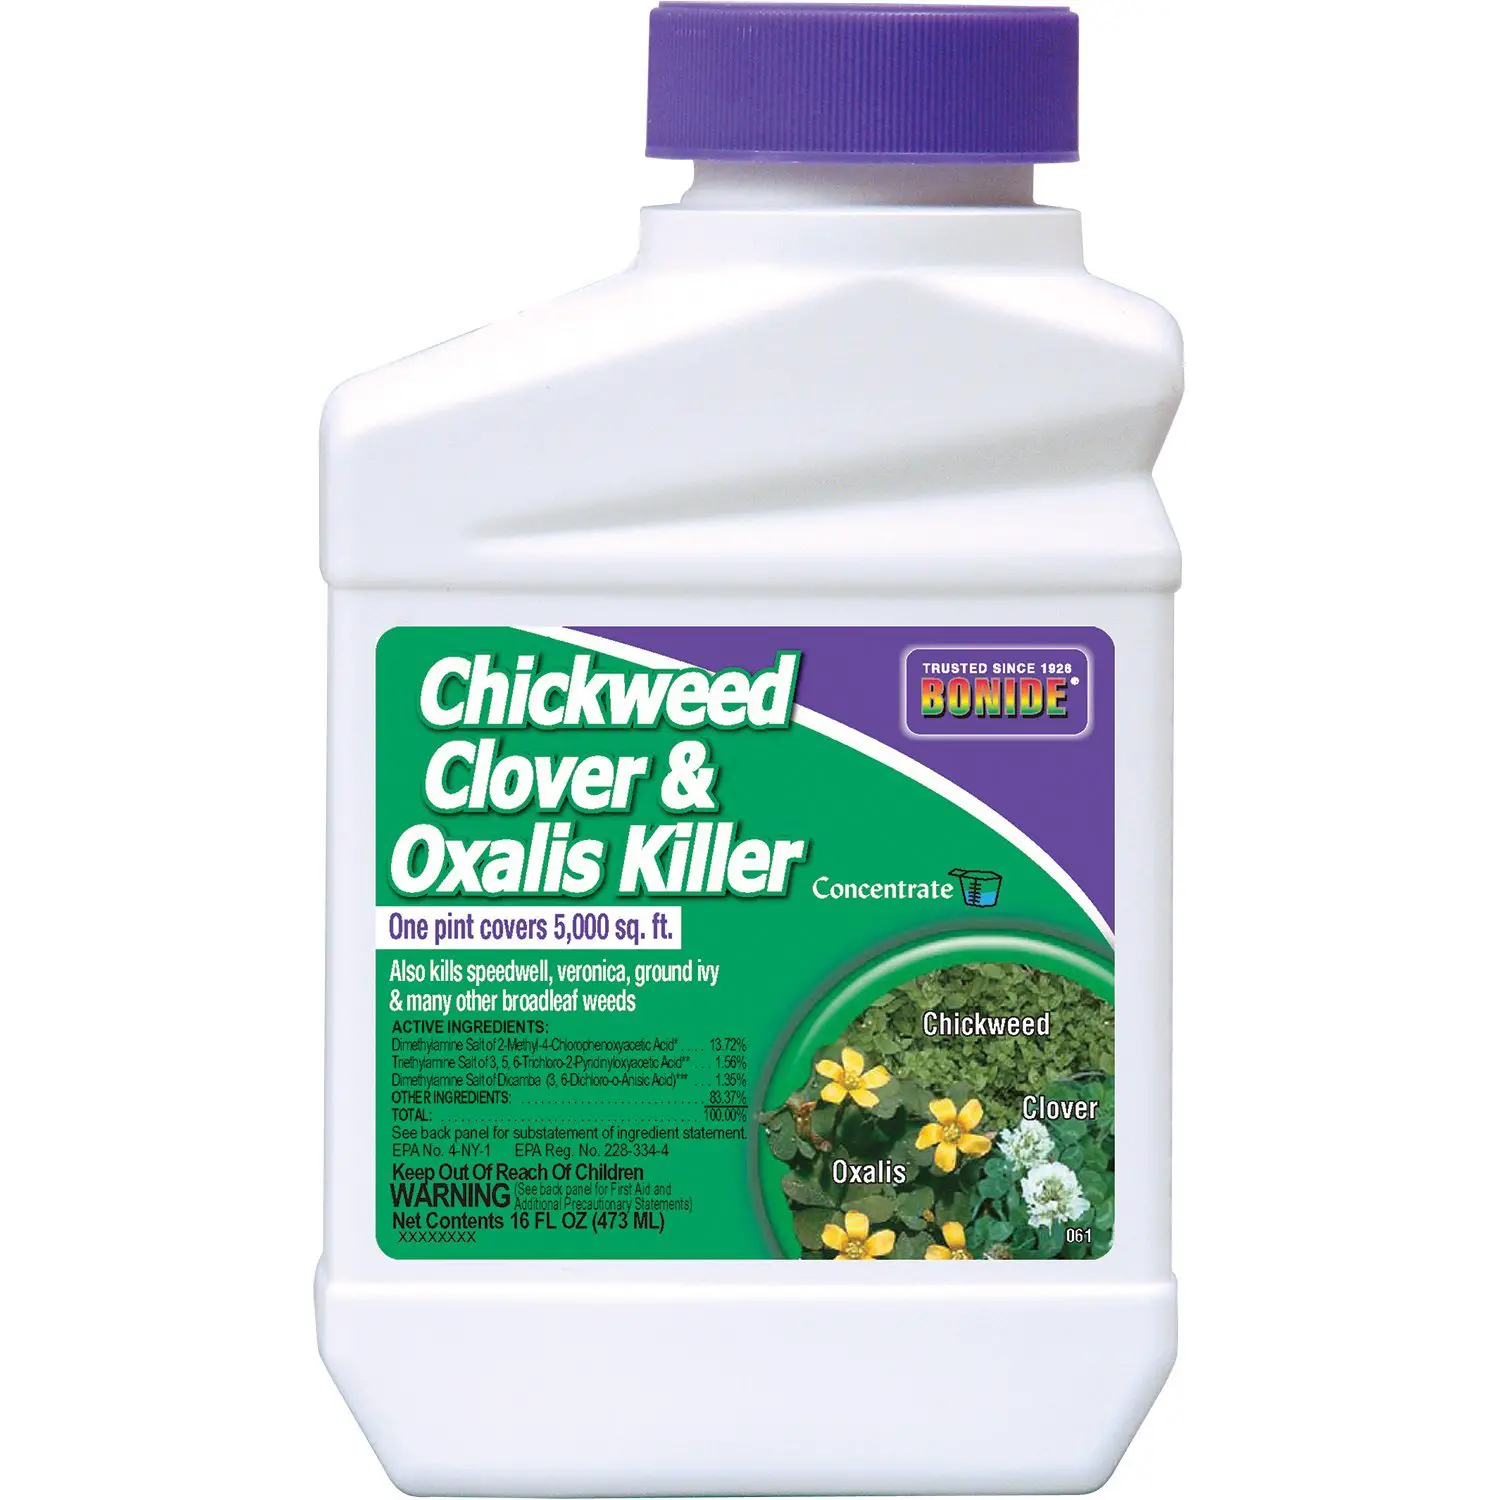 Chickweed, Clover and Oxalis Killer